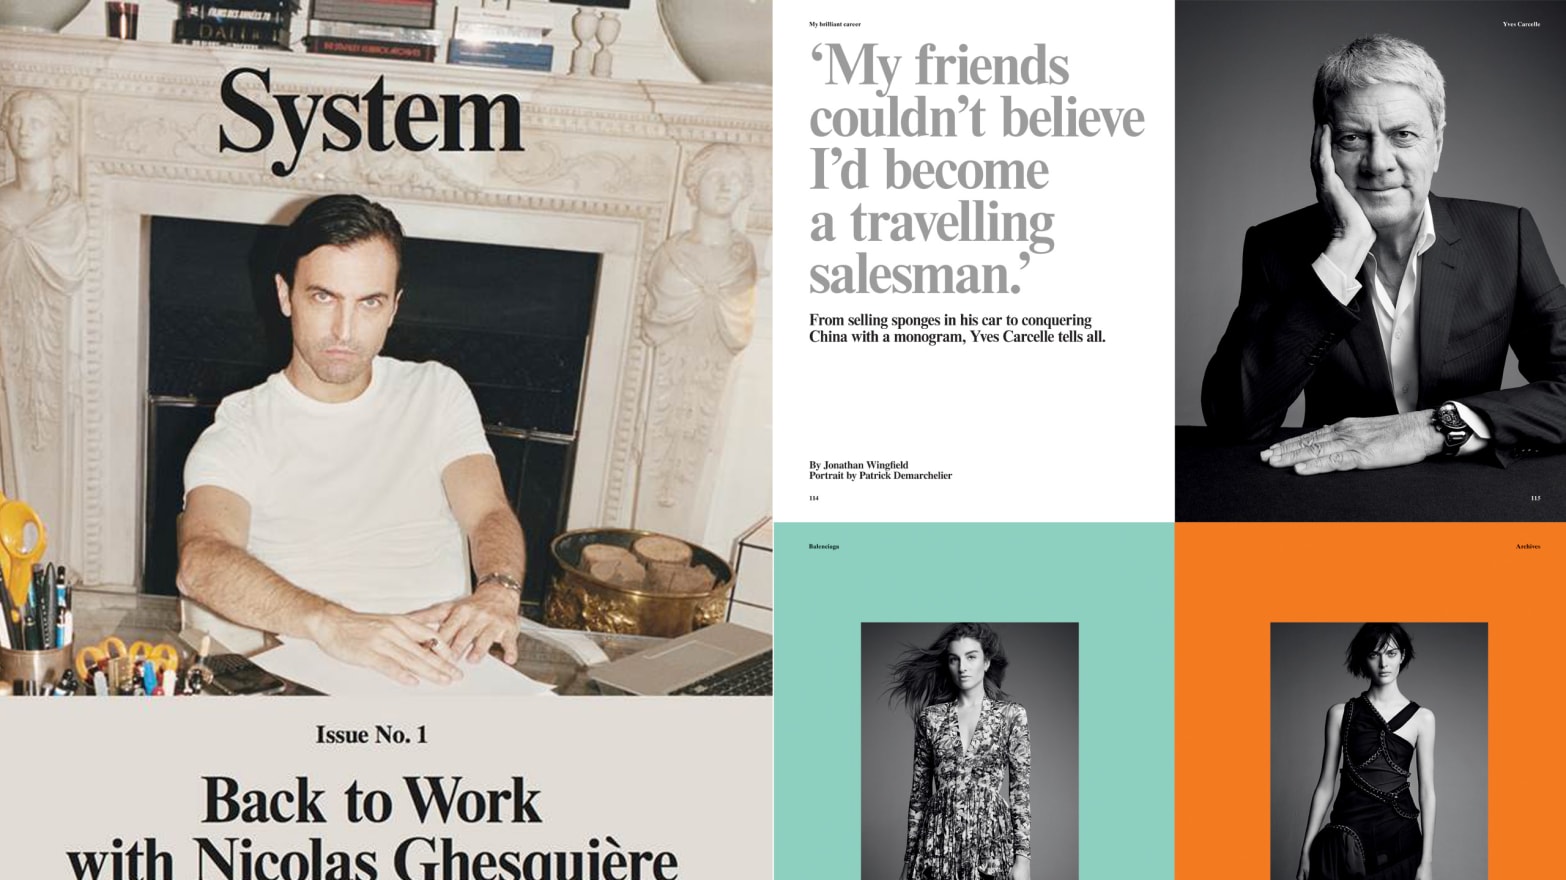 Louis Vuitton is launching its own biannual magazine